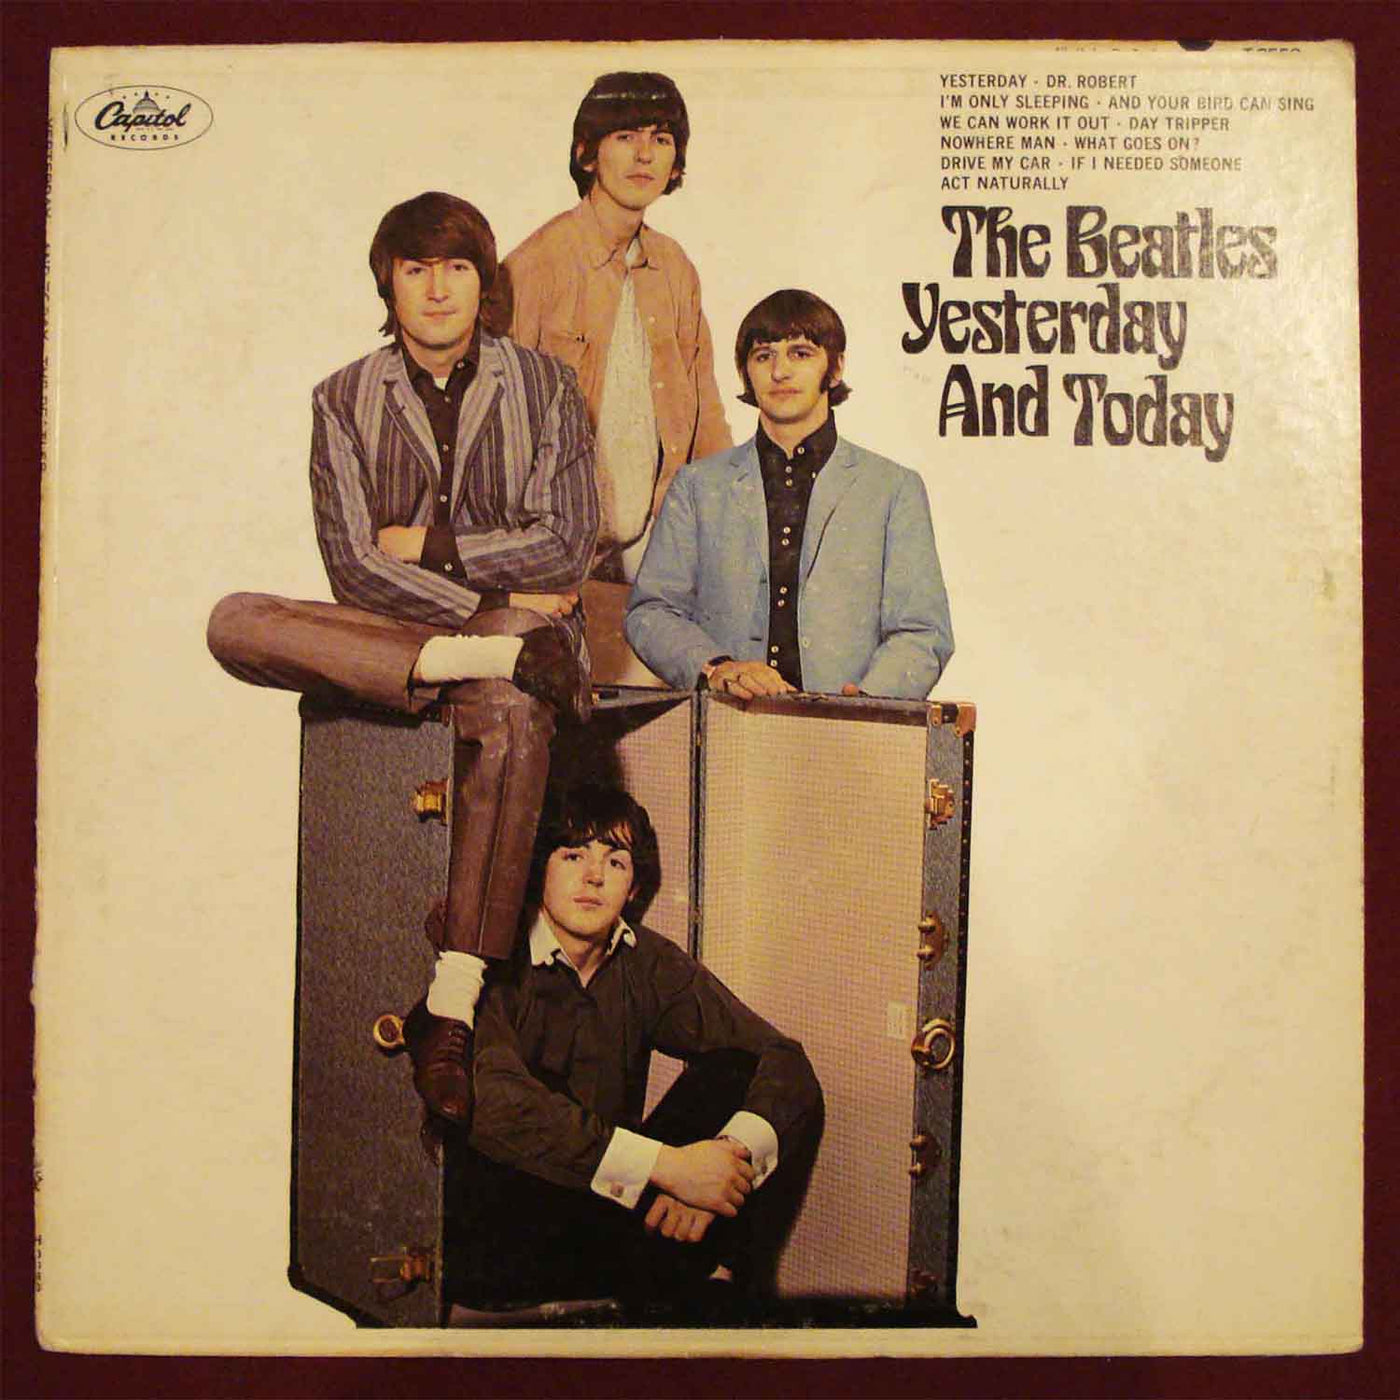 The Beatles - Yesterday and Today 2nd State Butcher Block Cover (1966), Vinyl LP 33rpm, T2553